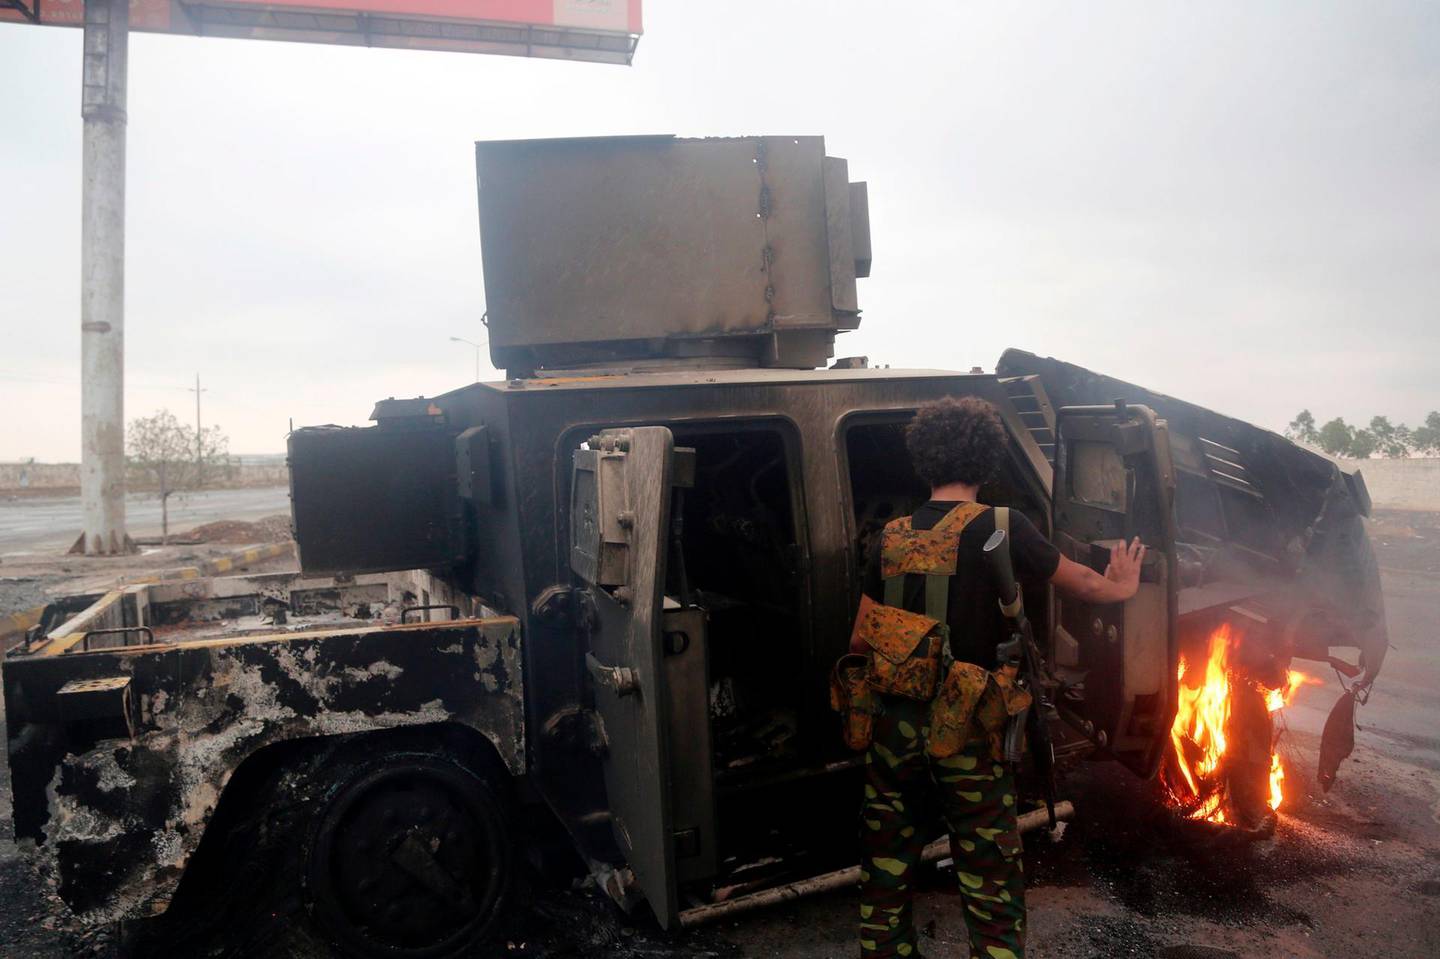 A Huthi rebel inspects a burnt armoured vehicle on September 13, 2018, reportedly destroyed in an air strike during clashes between fighters loyal to Saudi-backed exiled President Abd Rabbo Mansour Hadi and Huthi rebels near the eastern entrance of the Yemeni city of Hodeida, as coalition forces seized rebel supply routes into the coastal city.  Fighting has raged in the last two days close to the rebel-held port city of Hodeida, a crucial entry point for humanitarian aid that the Saudi-led coalition alleges also serves as a key conduit for arms to the Iran-backed Huthis.  / AFP / STRINGER
